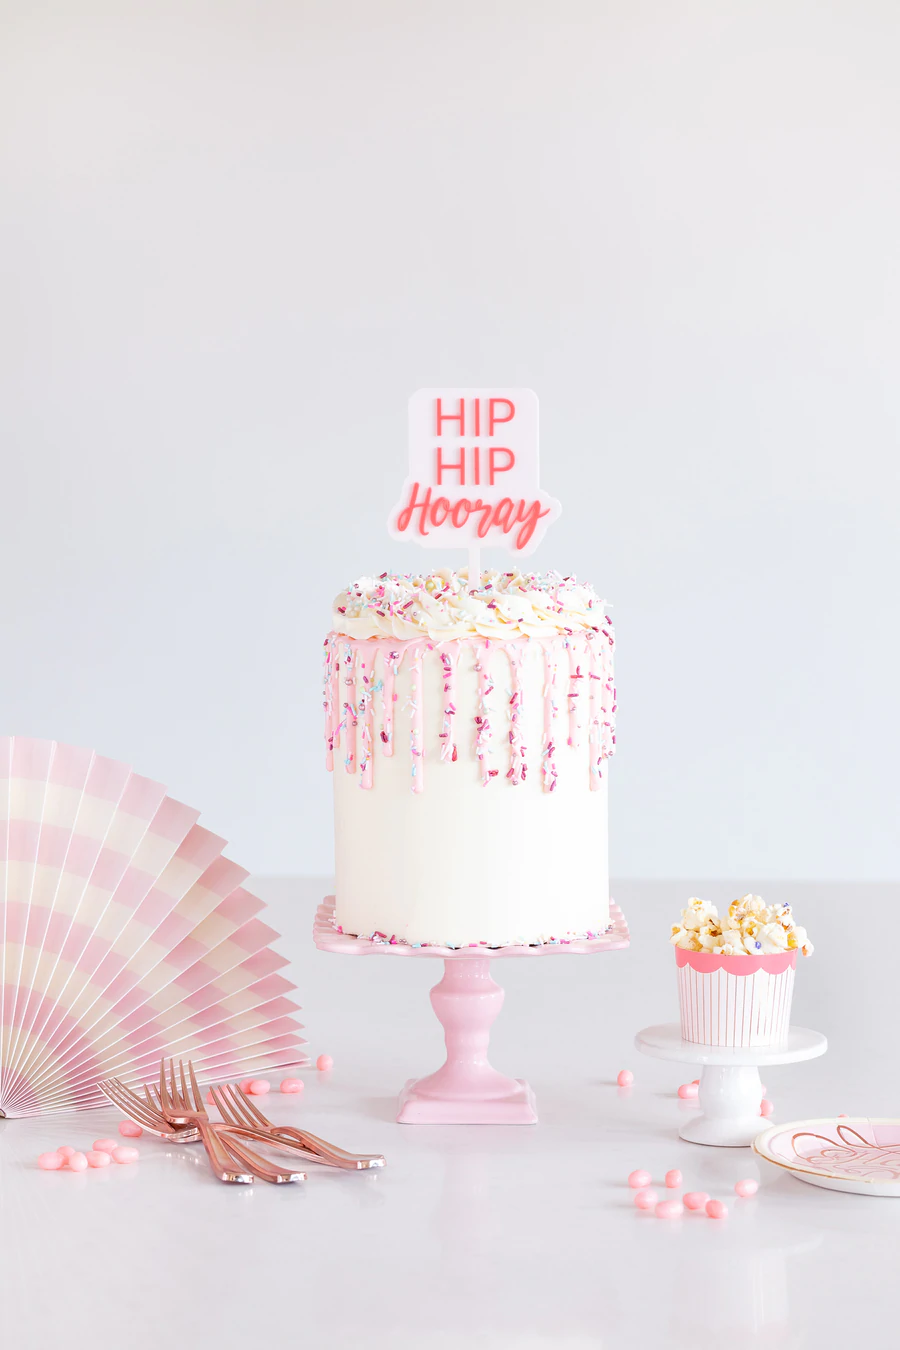 CAKE BY COURTNEY HIP HIP HOORAY ACRYLIC CAKE TOPPER My Mind's Eye Cake Topper Bonjour Fete - Party Supplies